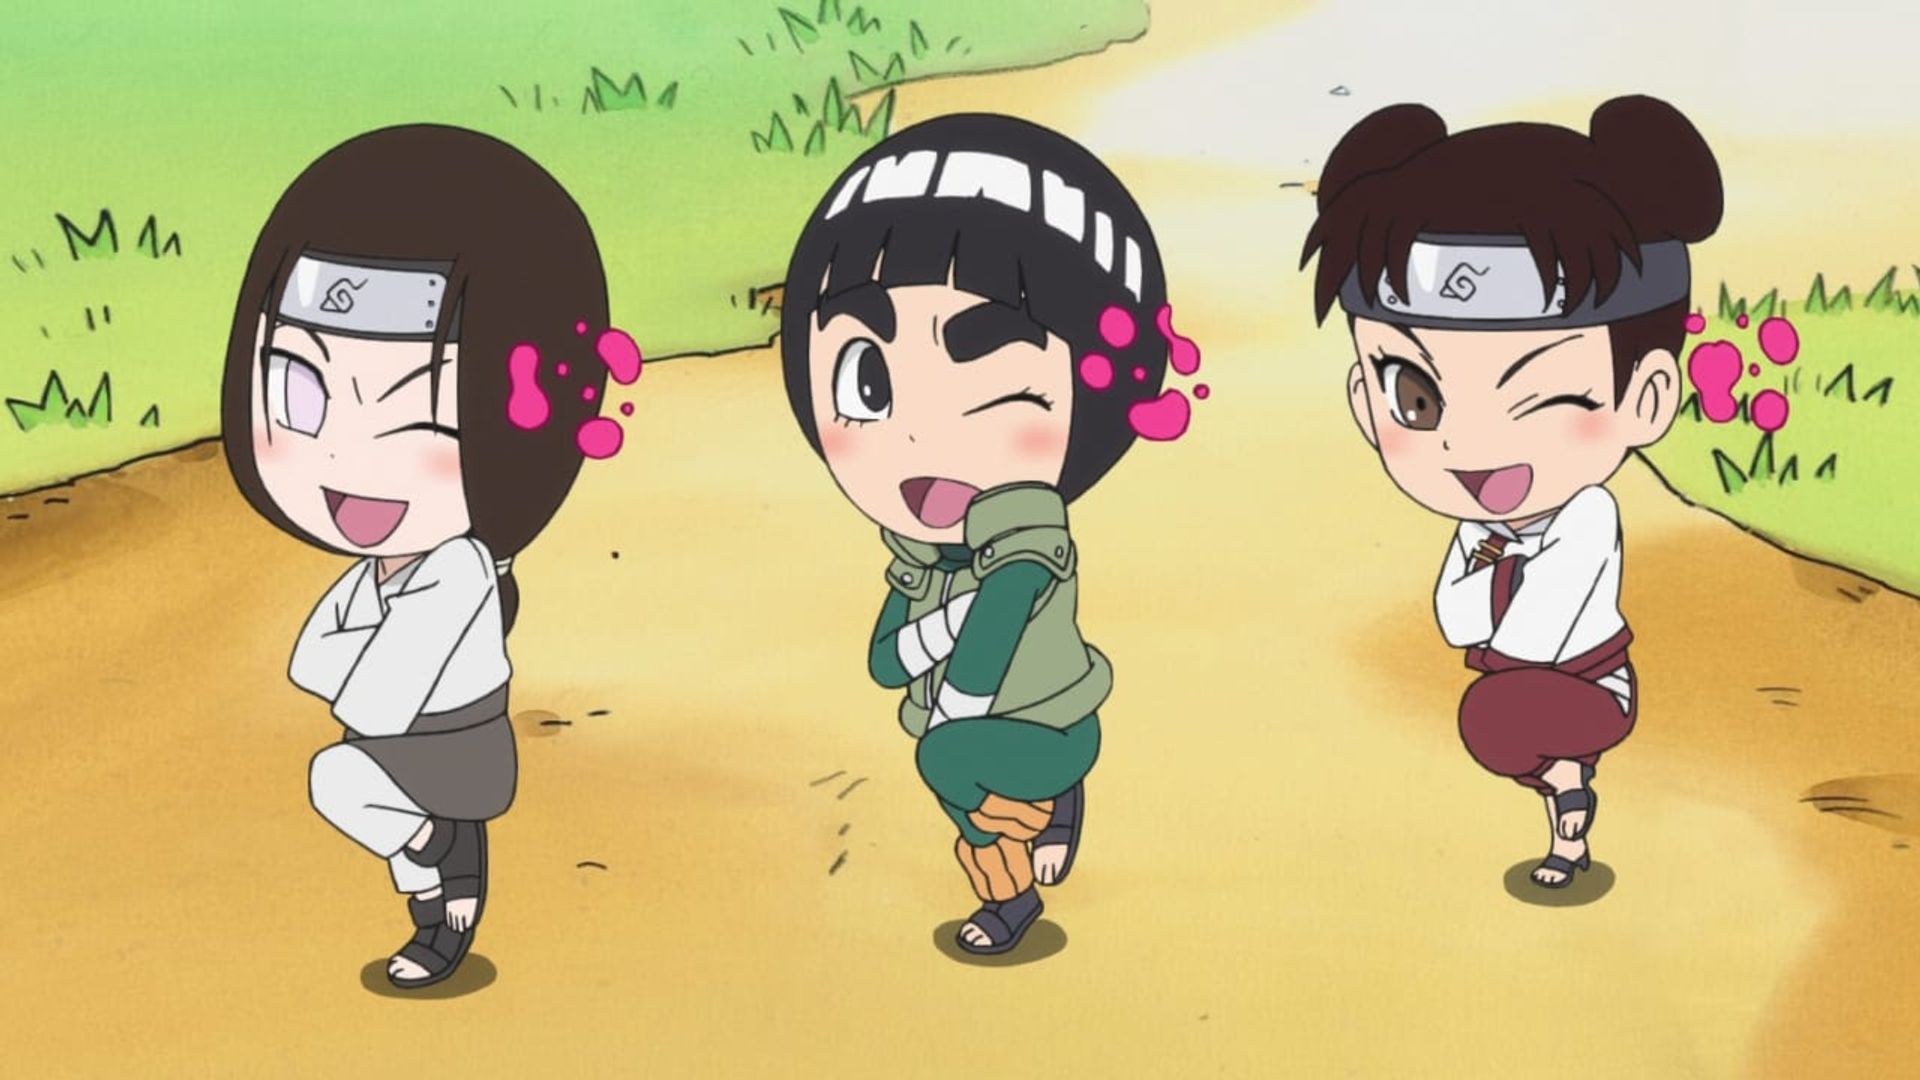 10 of the Best Chibi Anime Series You Should Check Out - Rock Lee & His Ninja Pals still